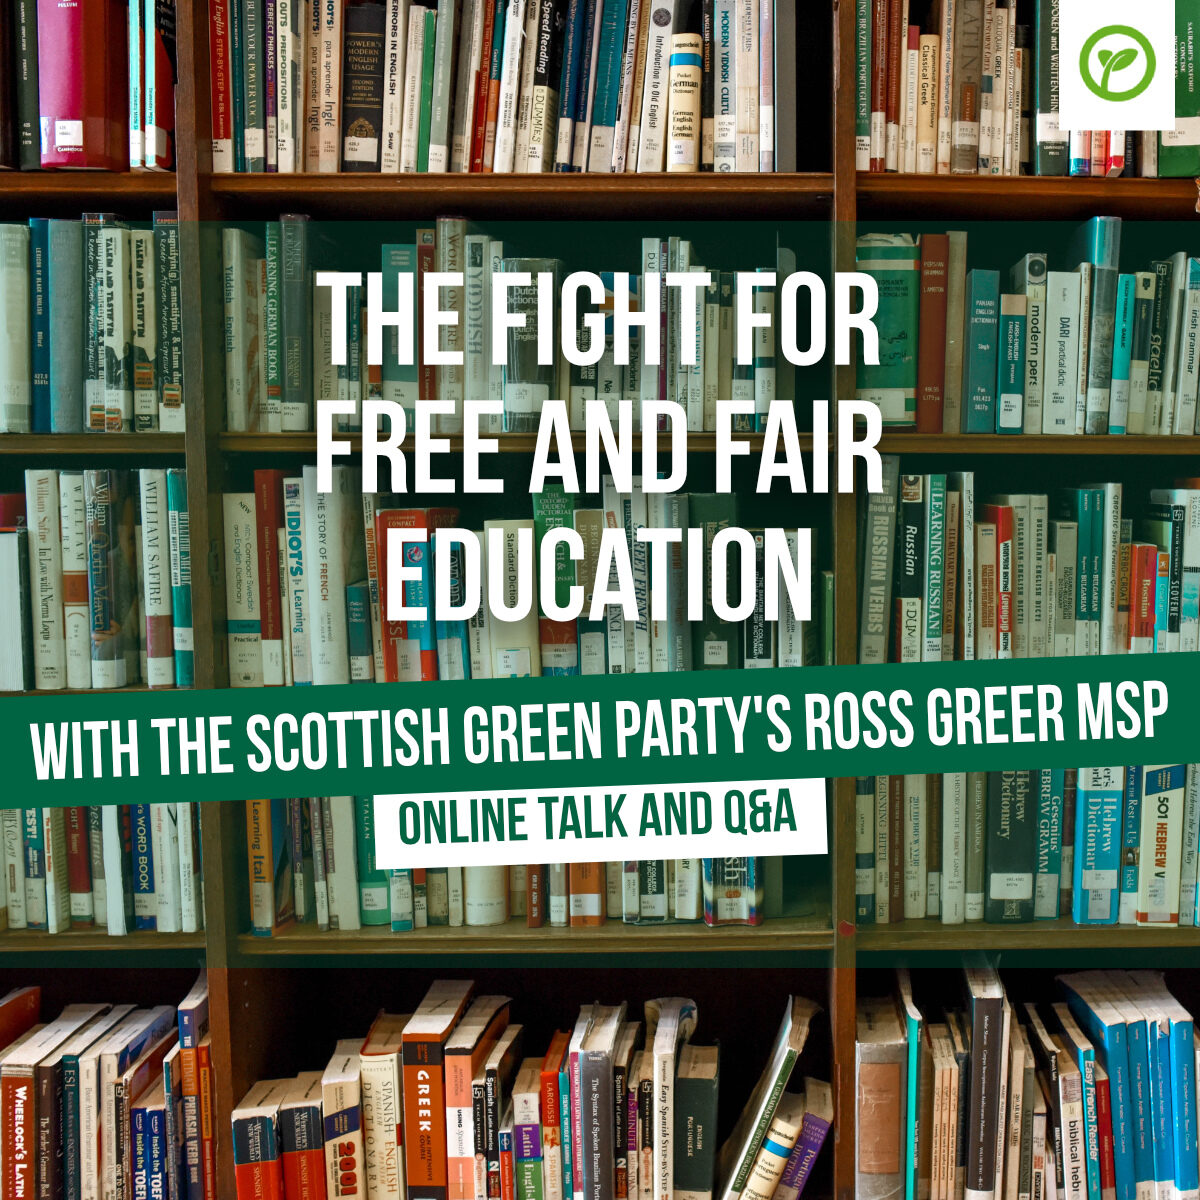 The fight for free and fair education with the Scottish Green Party's Ross Greer MSP. Online talk and Q&A.